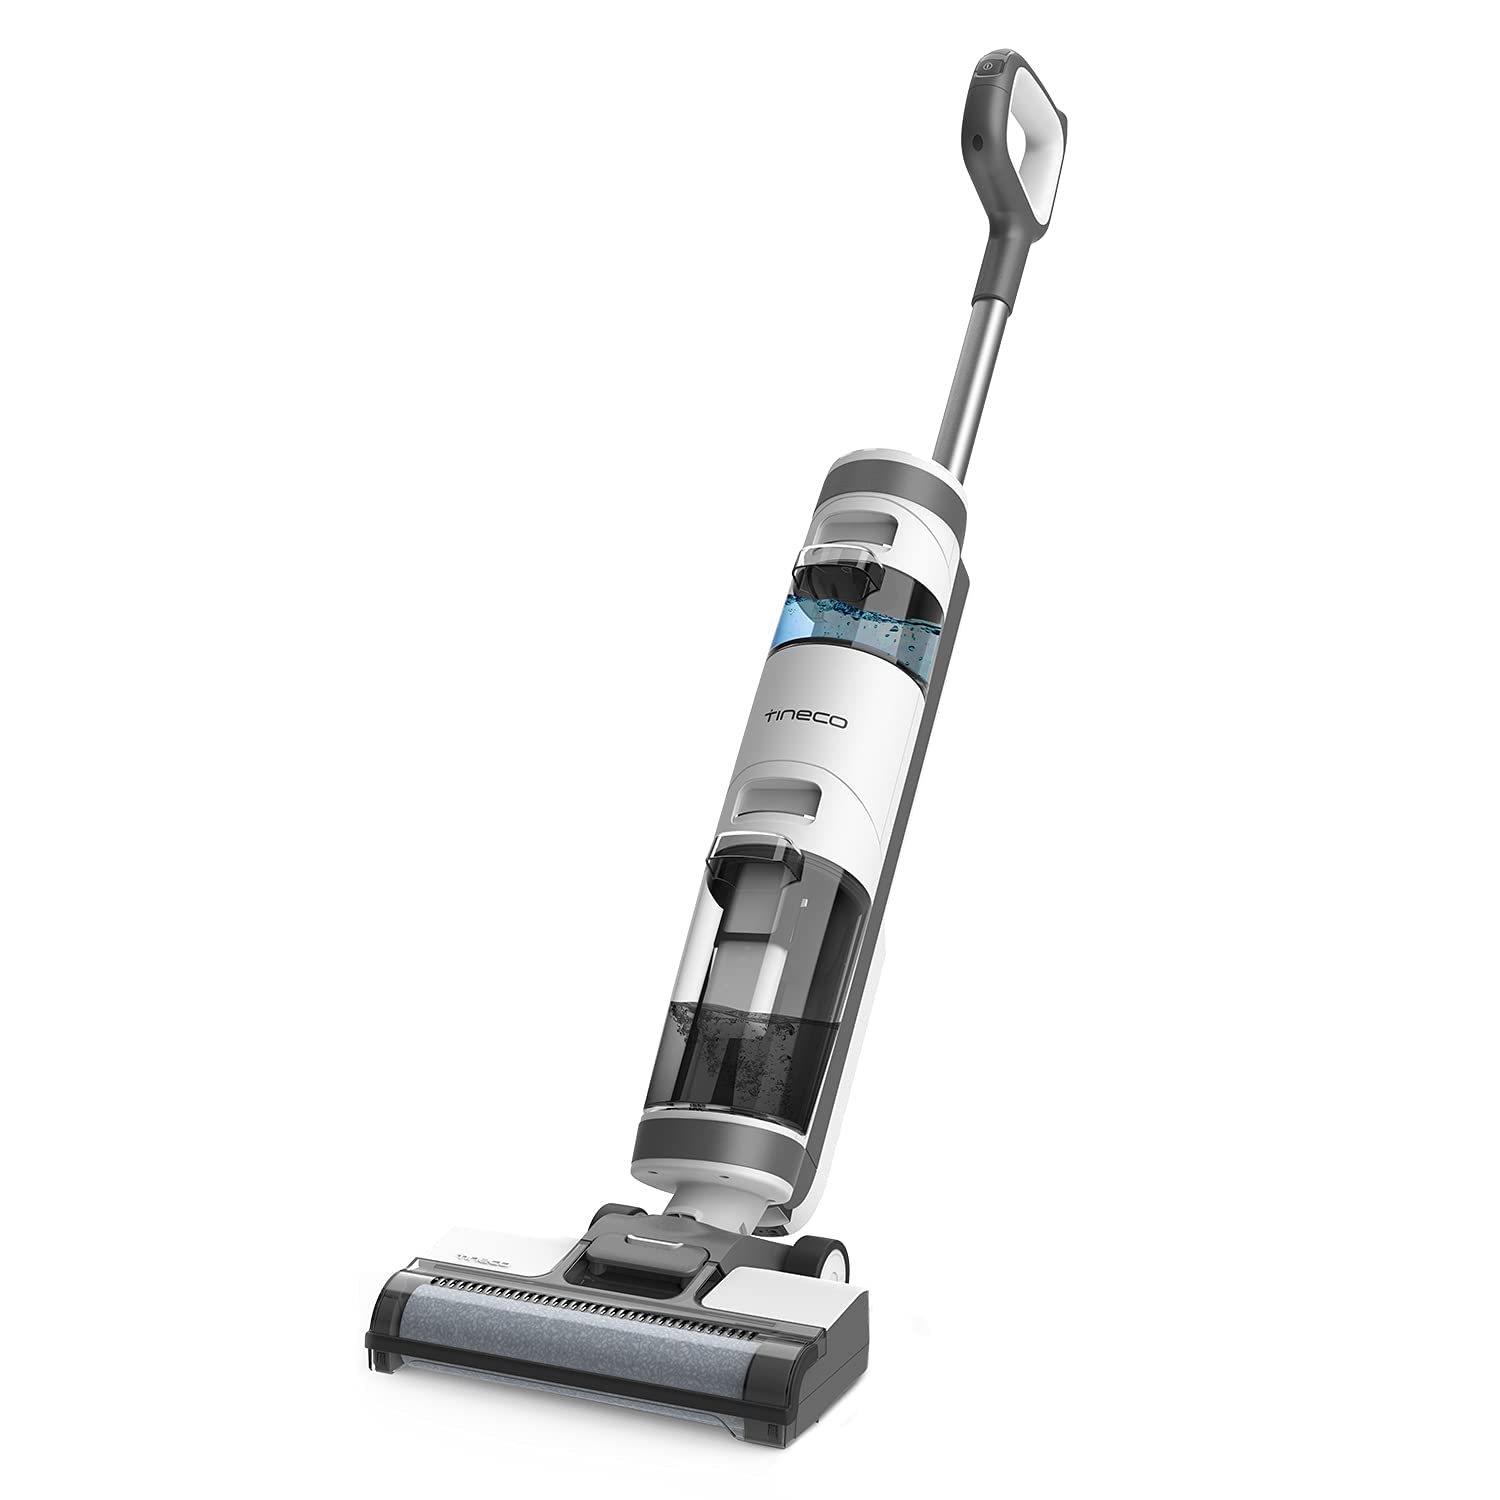 Tineco iFLOOR3 Cordless Wet Dry Vacuum Cleaner, Lightweight, One-Step Cleaning for Hard Floors